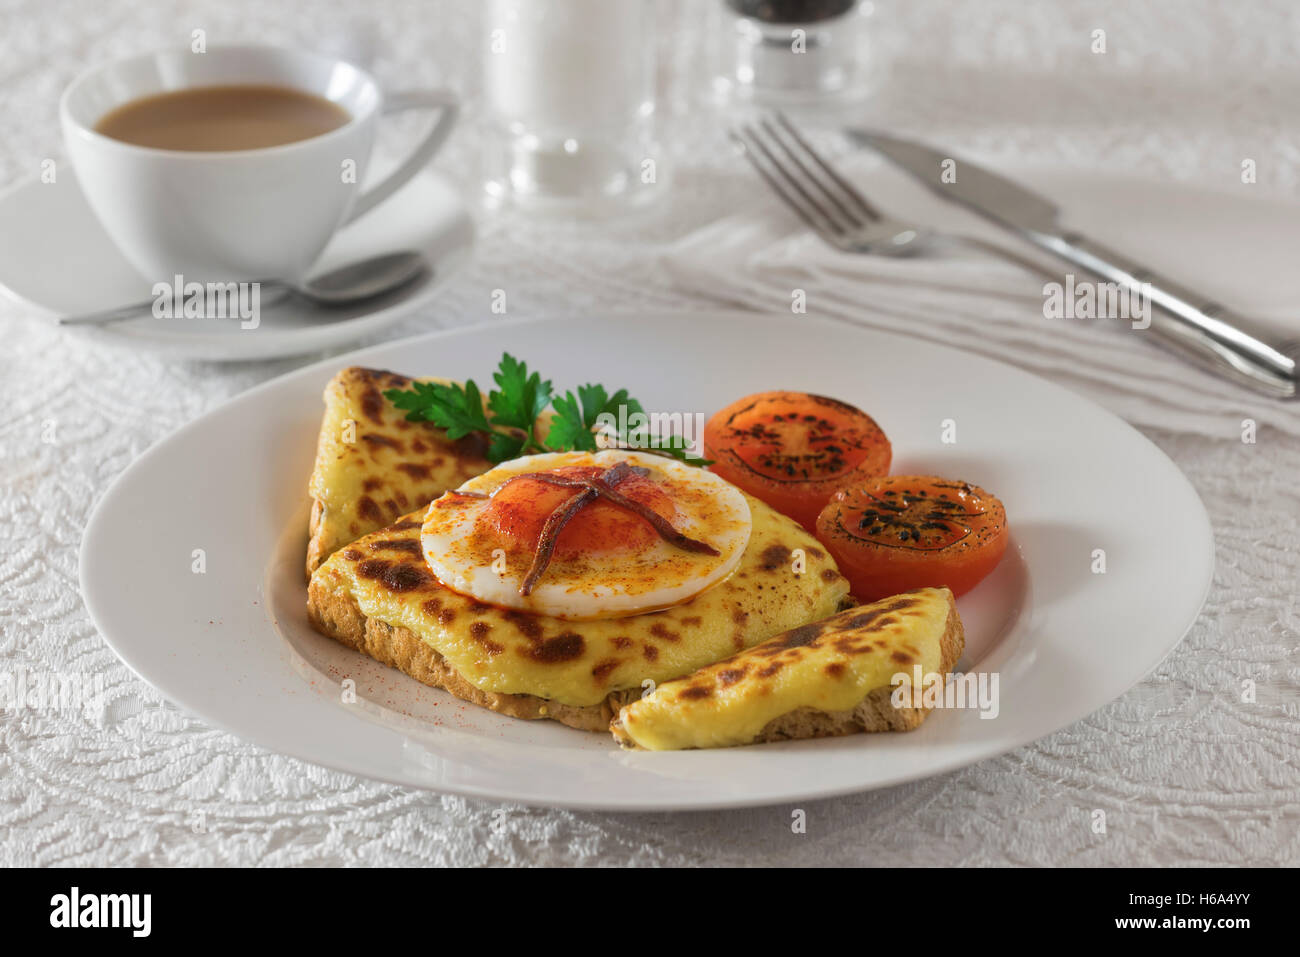 Buck rarebit. Grilled cheese topping on toast with a poached egg. Stock Photo